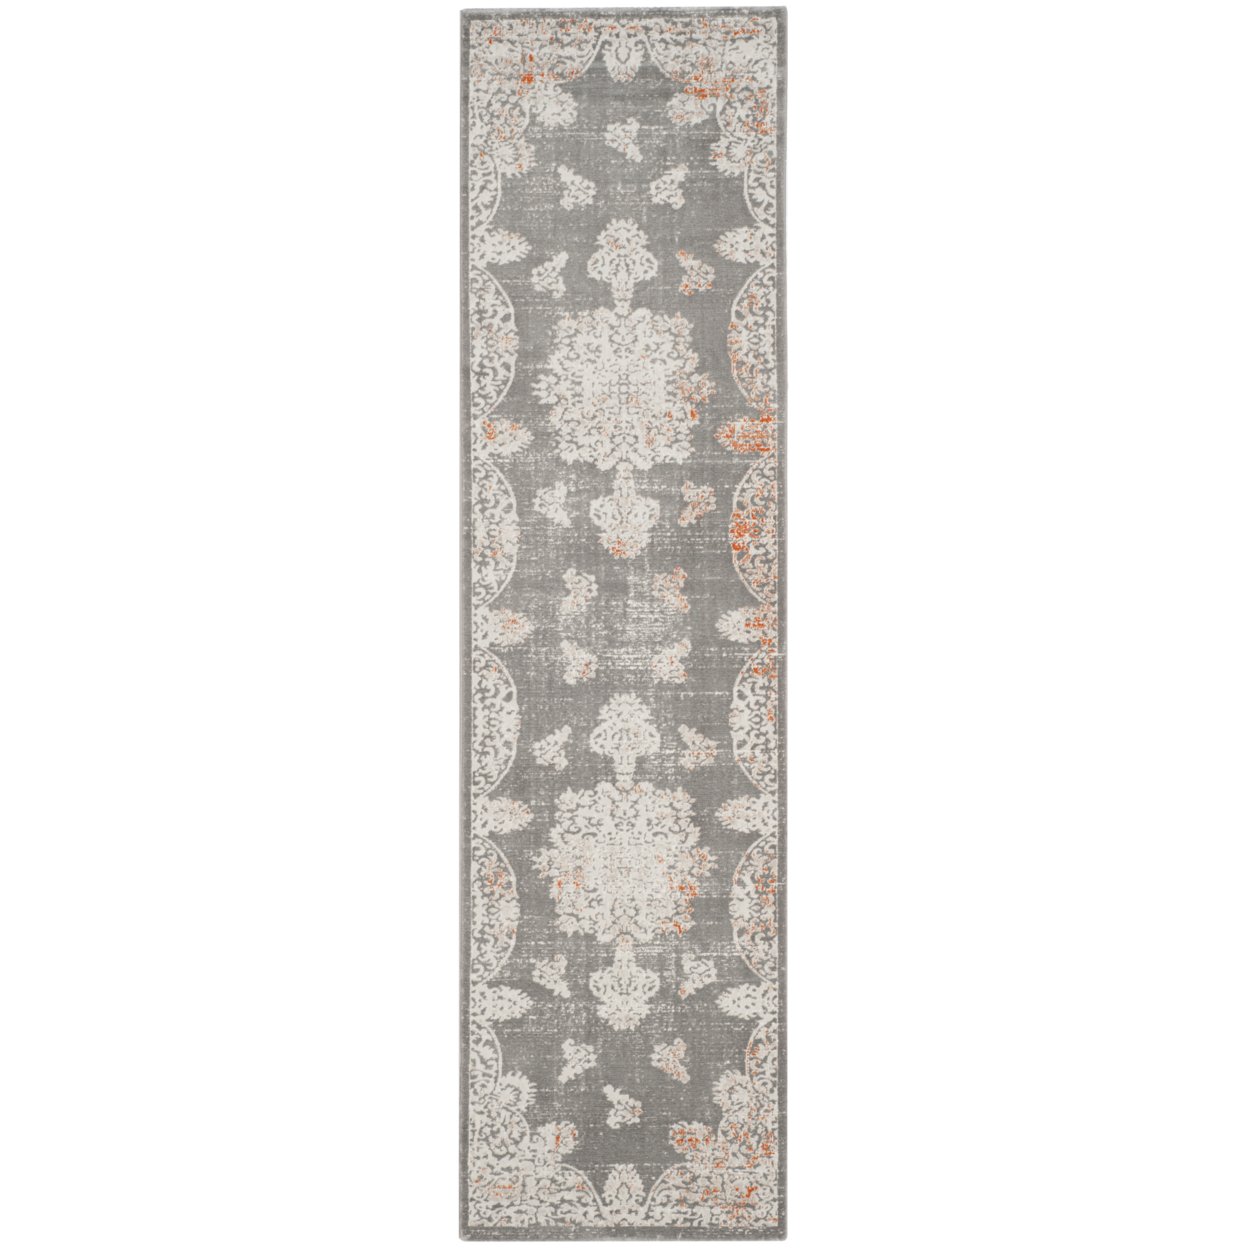 SAFAVIEH Passion Collection PAS406F Grey / Ivory Rug - 9' X 12'